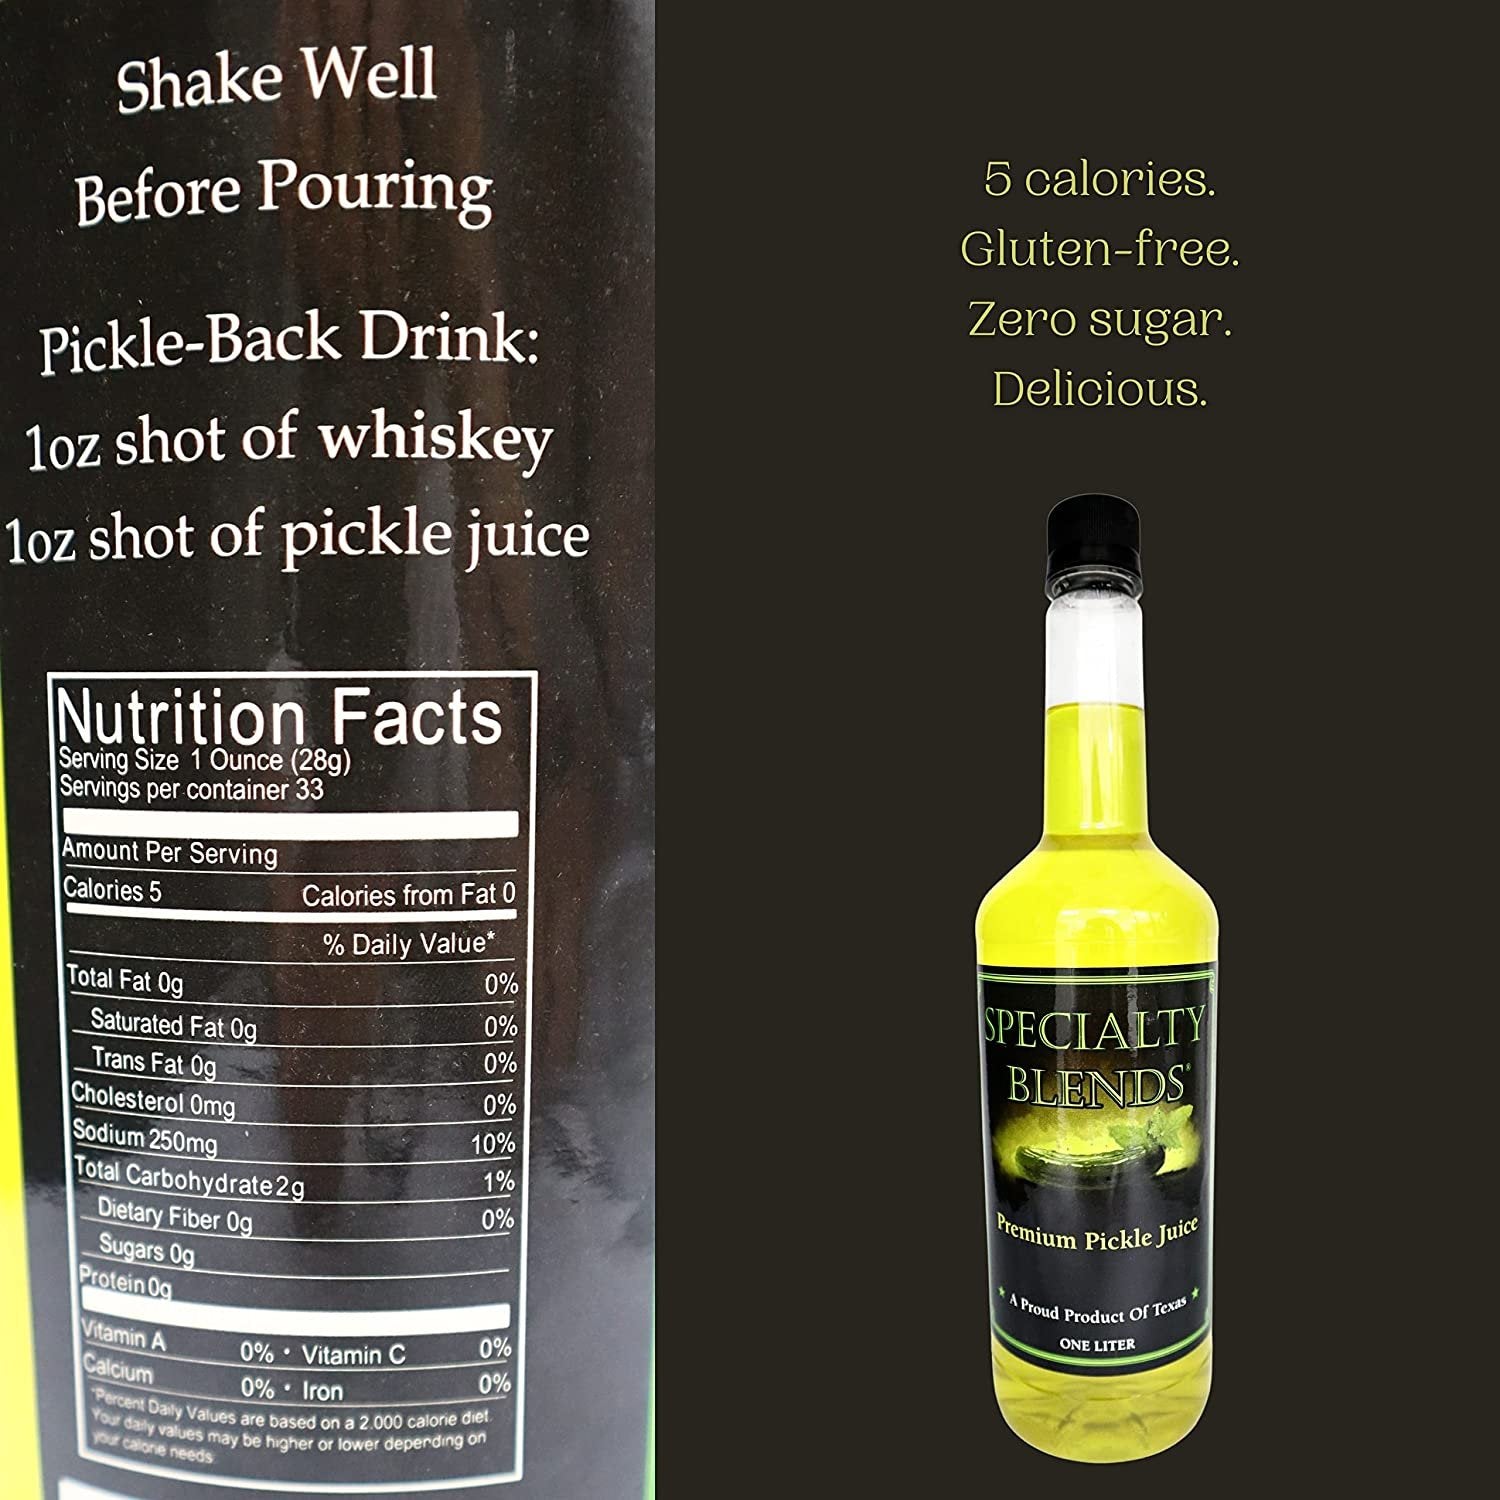 Specialty Blends - Premium Pickle Juice - Pickle Juice for Leg Cramps , Freeze Pops, Drink Mixer - Gluten Free, Keto Friendly, Natural Electrolyte Drink - Made in USA - 1L - (Bottle, 1)